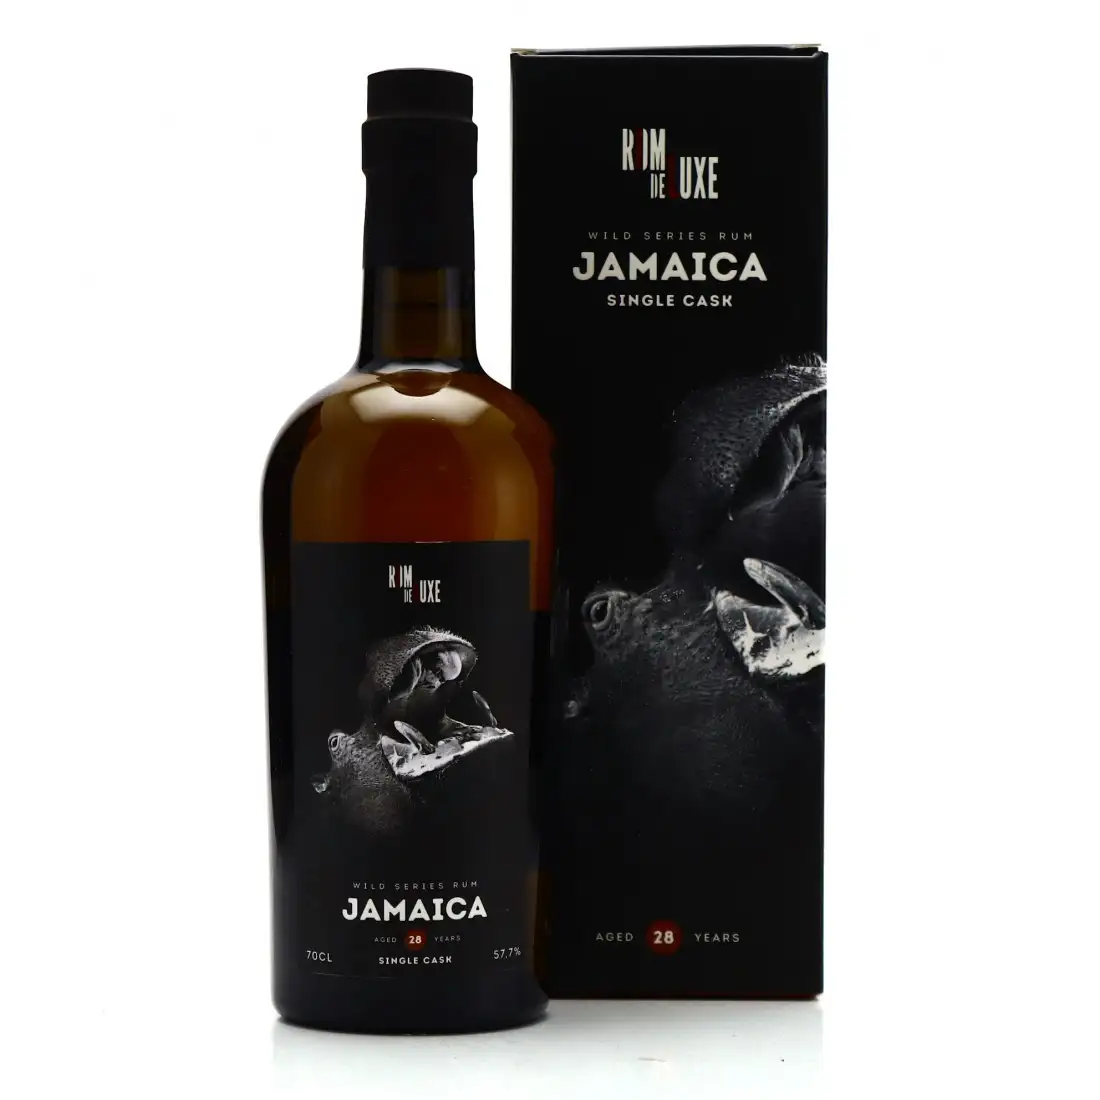 Image of the front of the bottle of the rum Wild Series Rum Jamaica No. 18 JMC